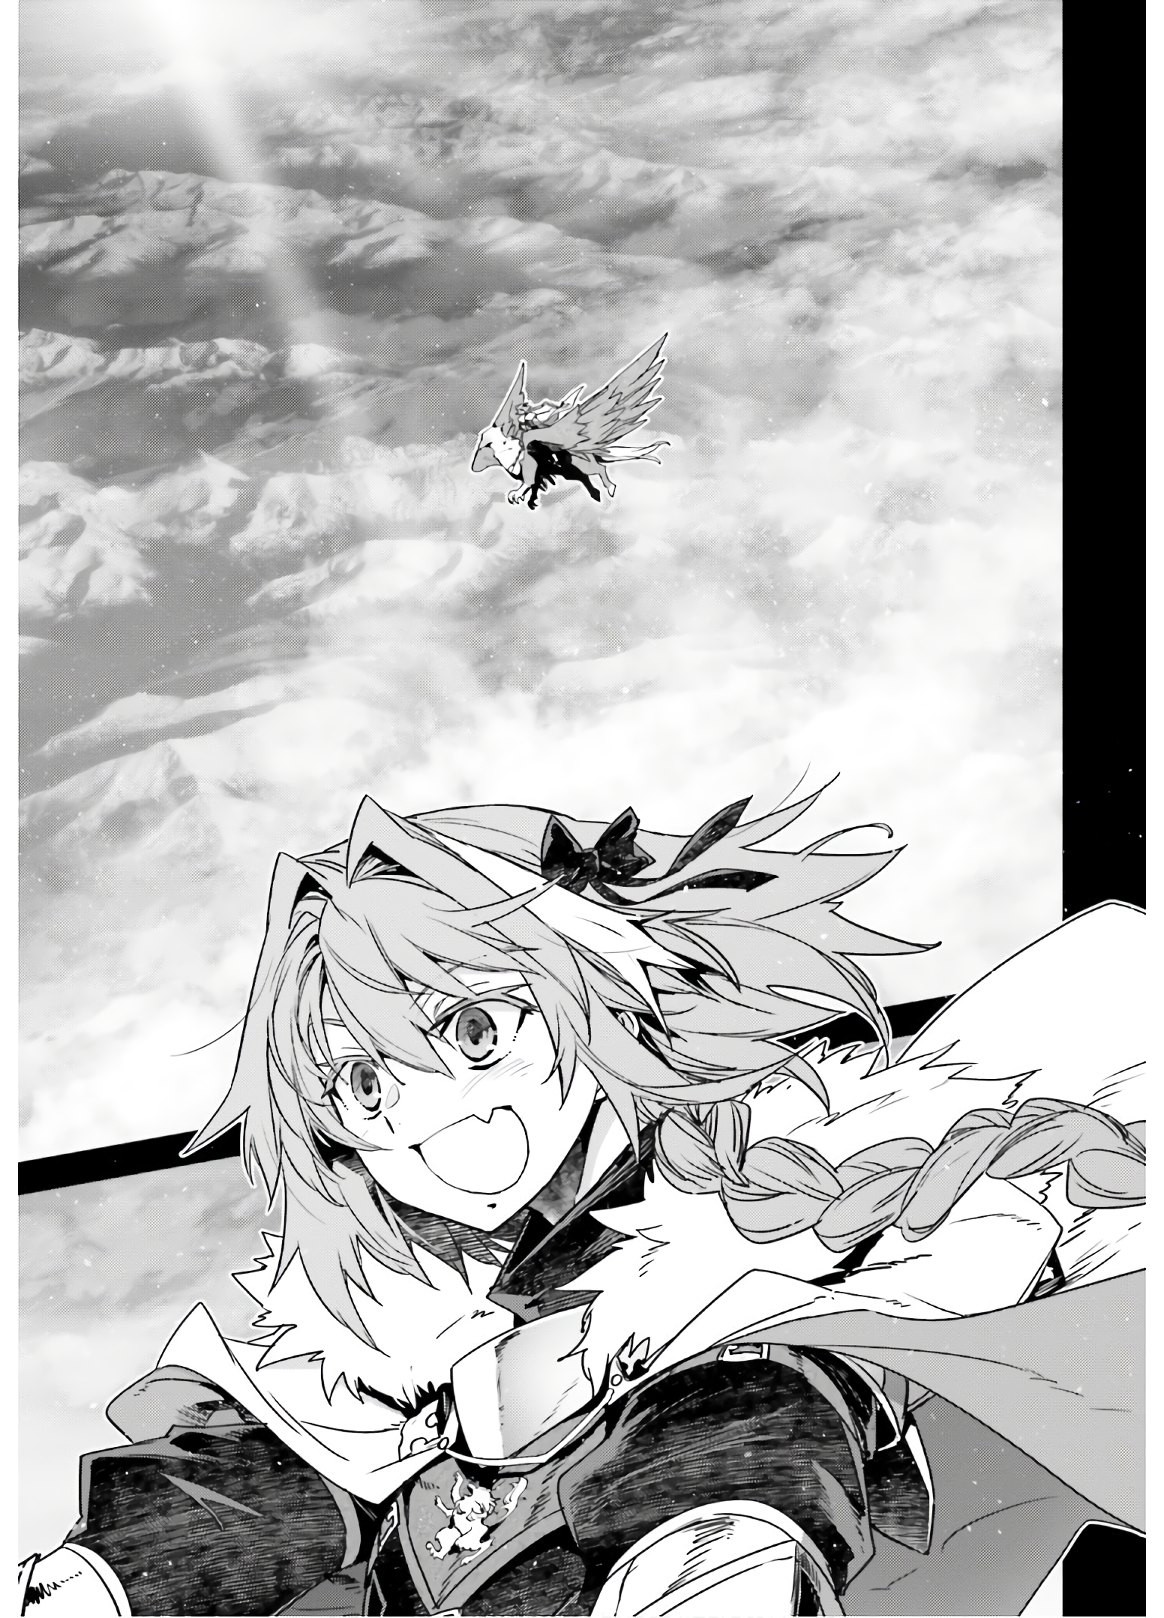 Fate-Apocrypha - Chapter 42-2 - Page 3